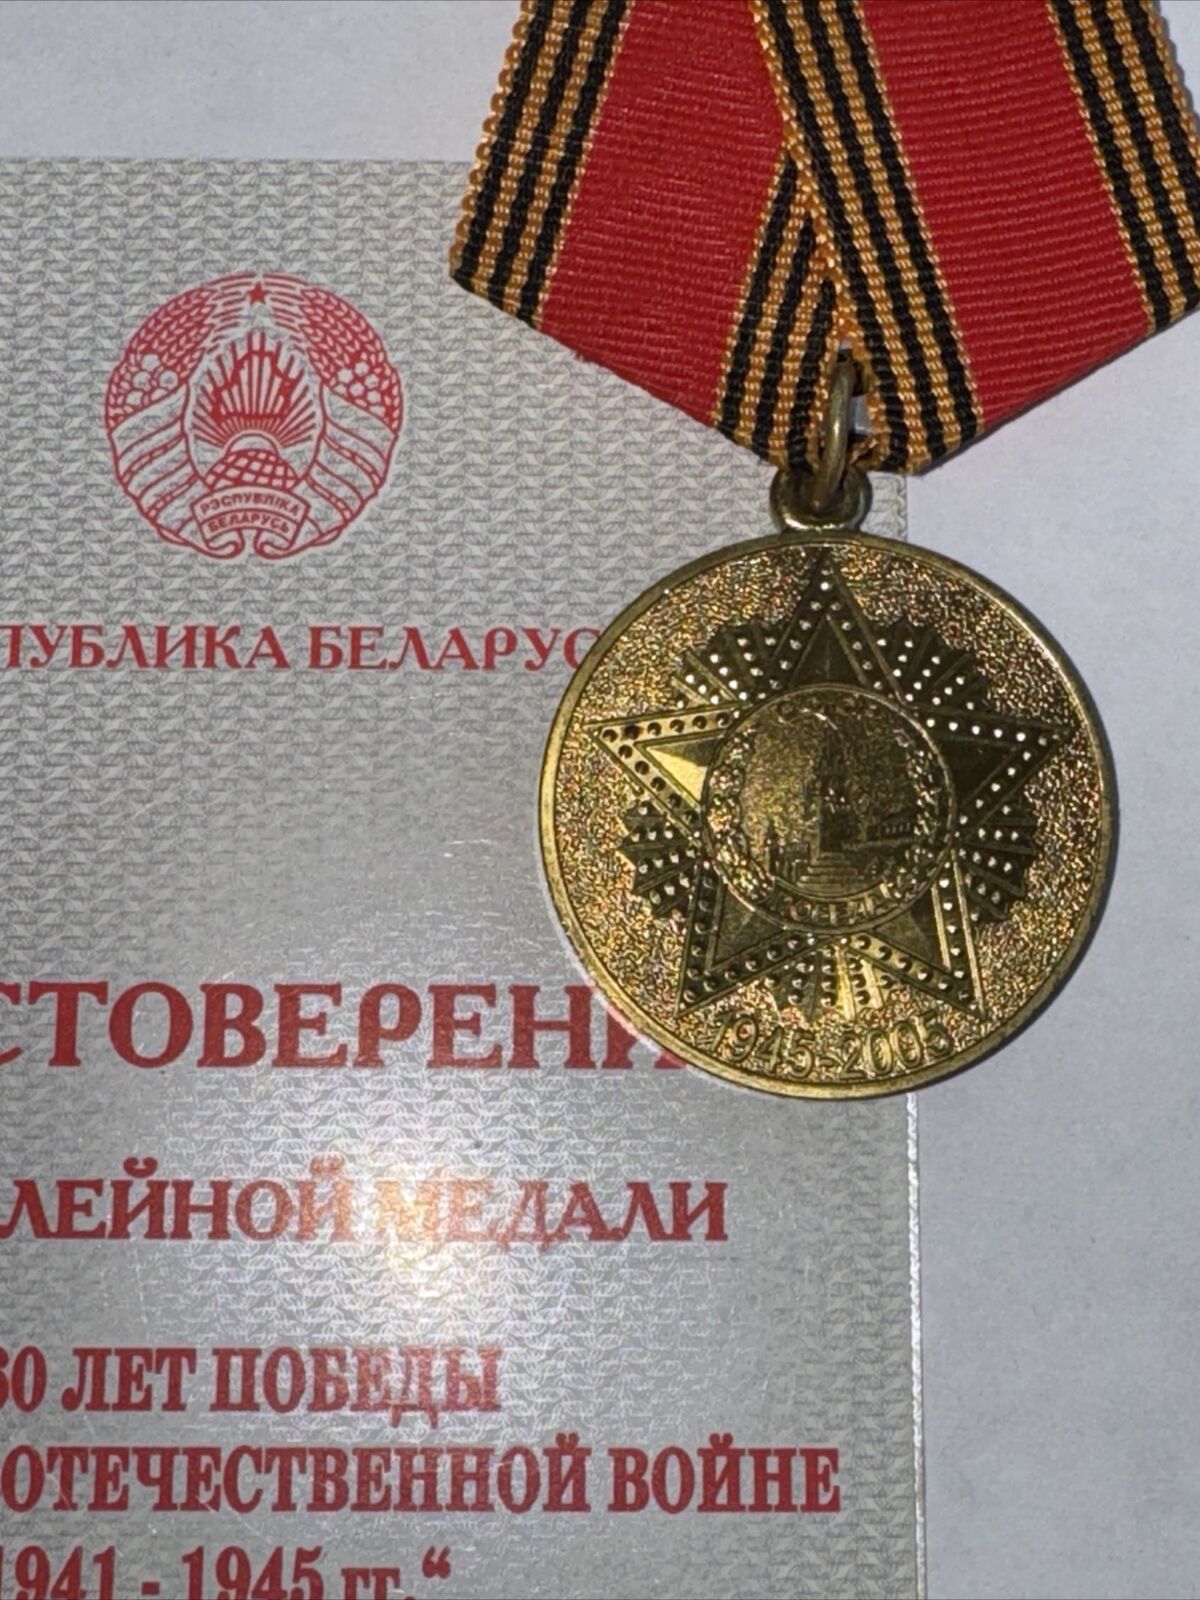 Belarus Republic MEDAL  60th  Anniv. of the VICTORY in the Great Patriotic War